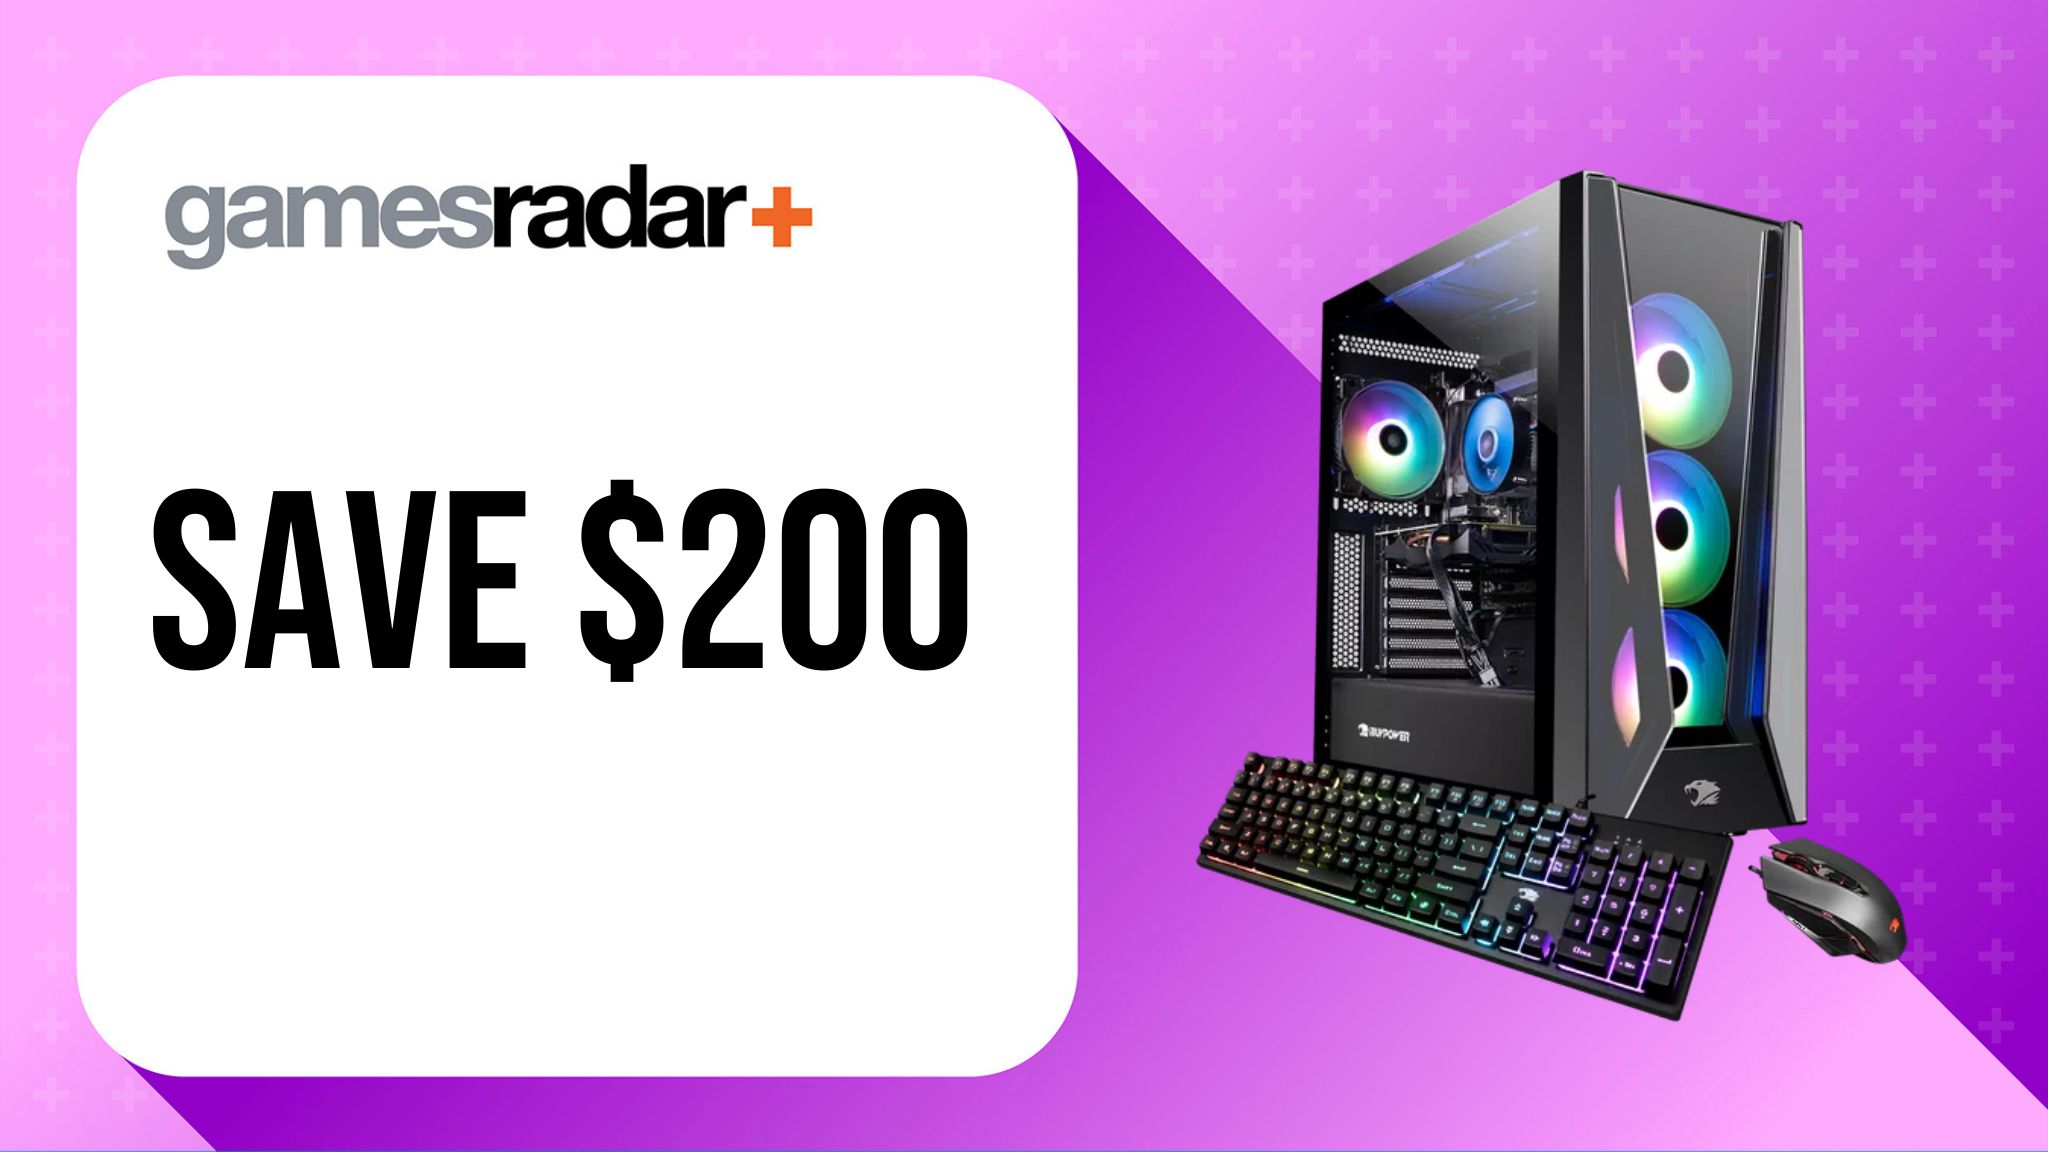 iBuypower Trace MR258i deal saves $200